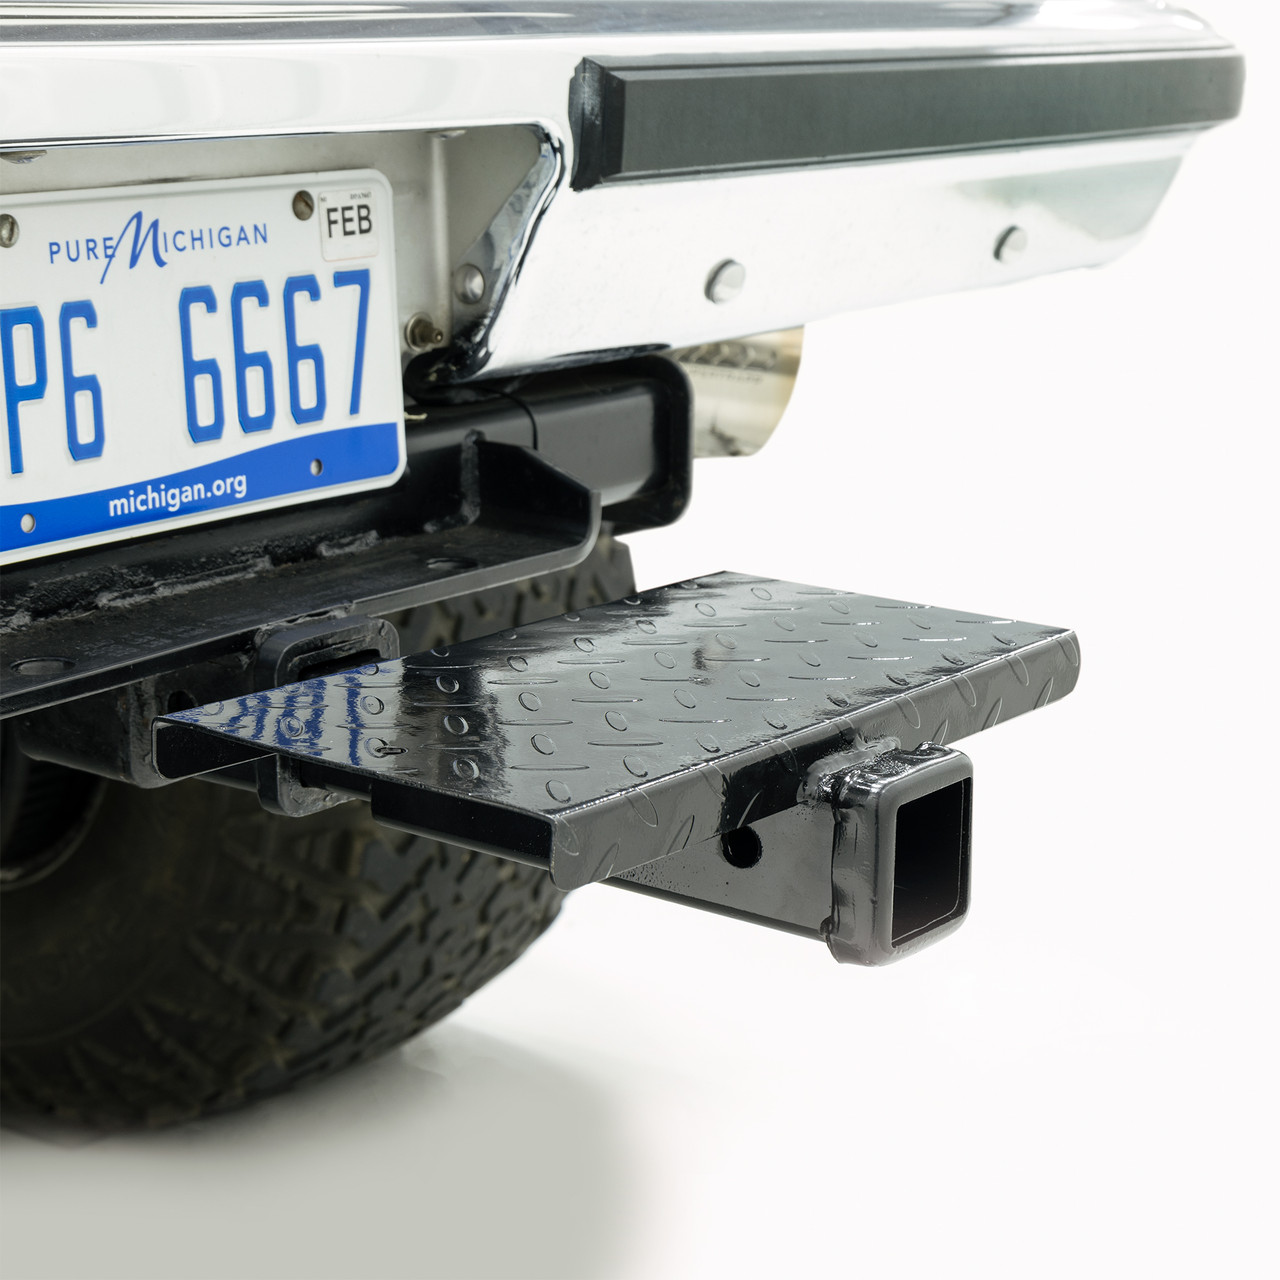 USA Bump Step Hitch Step - Trailer Hitch Mounted Bumper Protector